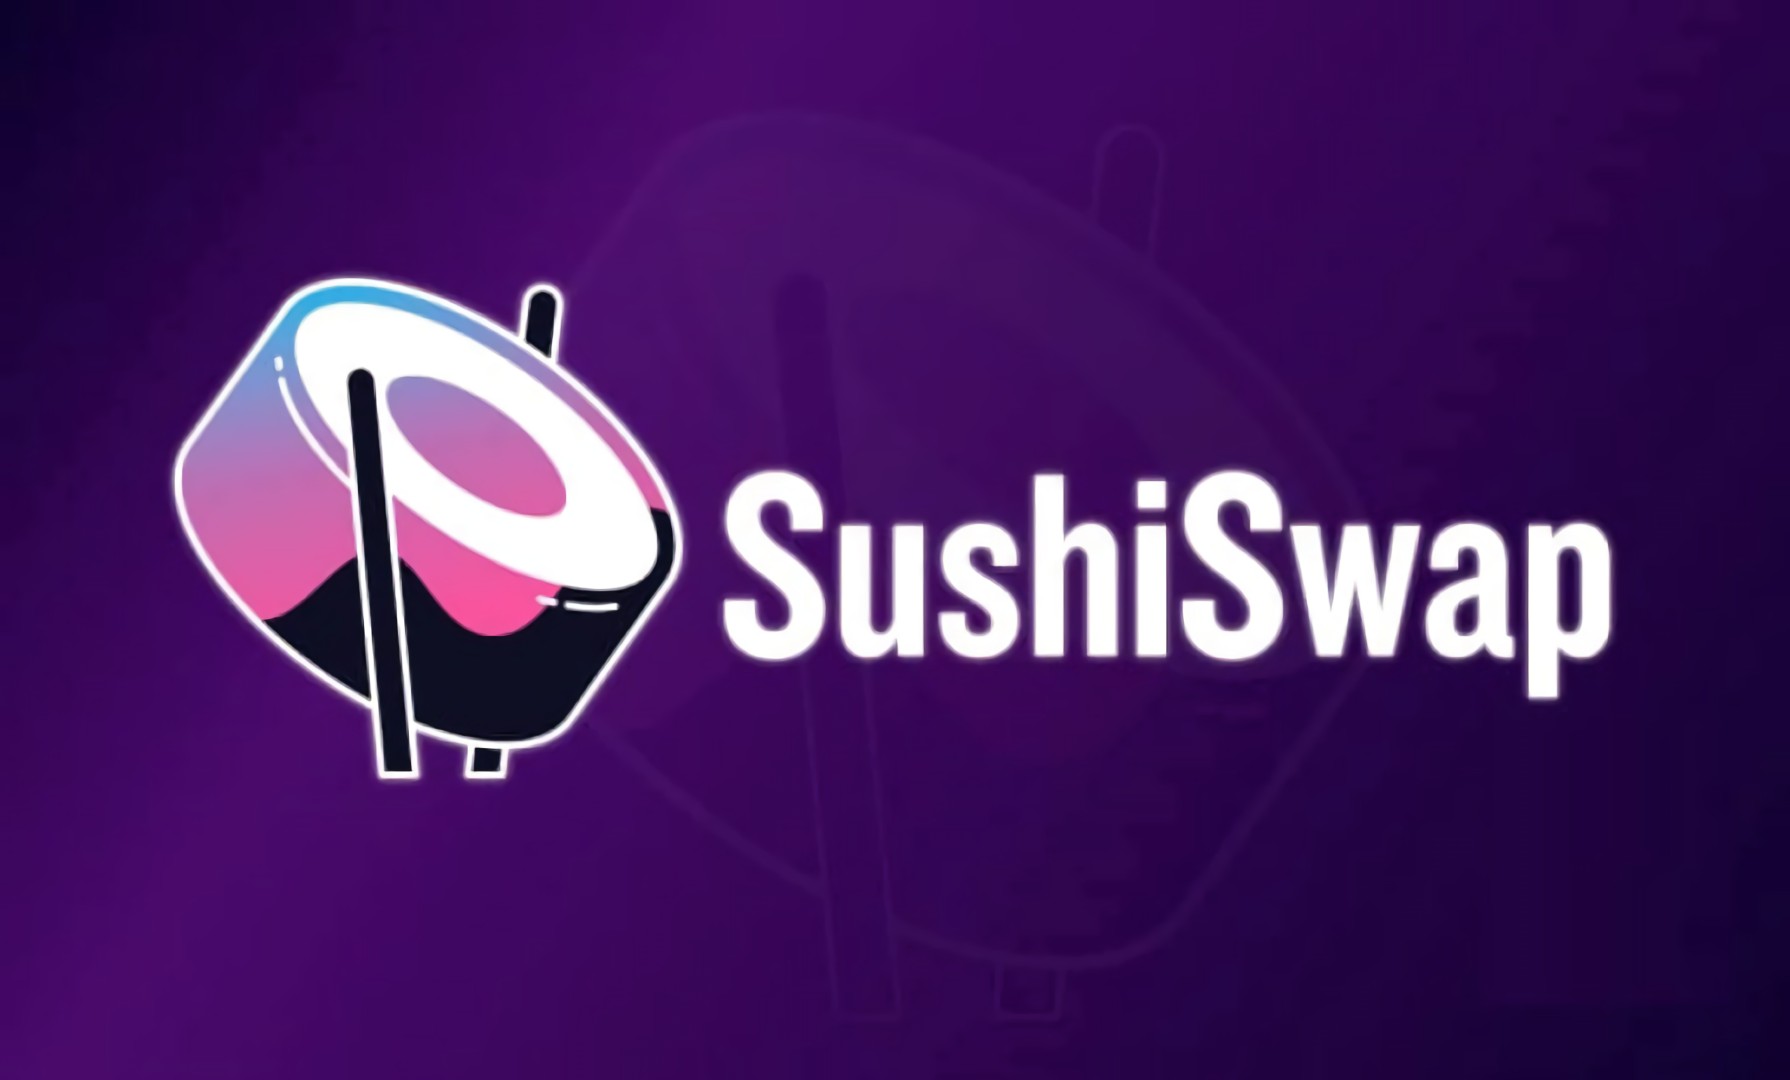 Decentralized crypto exchange SushiSwap (SUSHI) has received a subpoena from the SEC